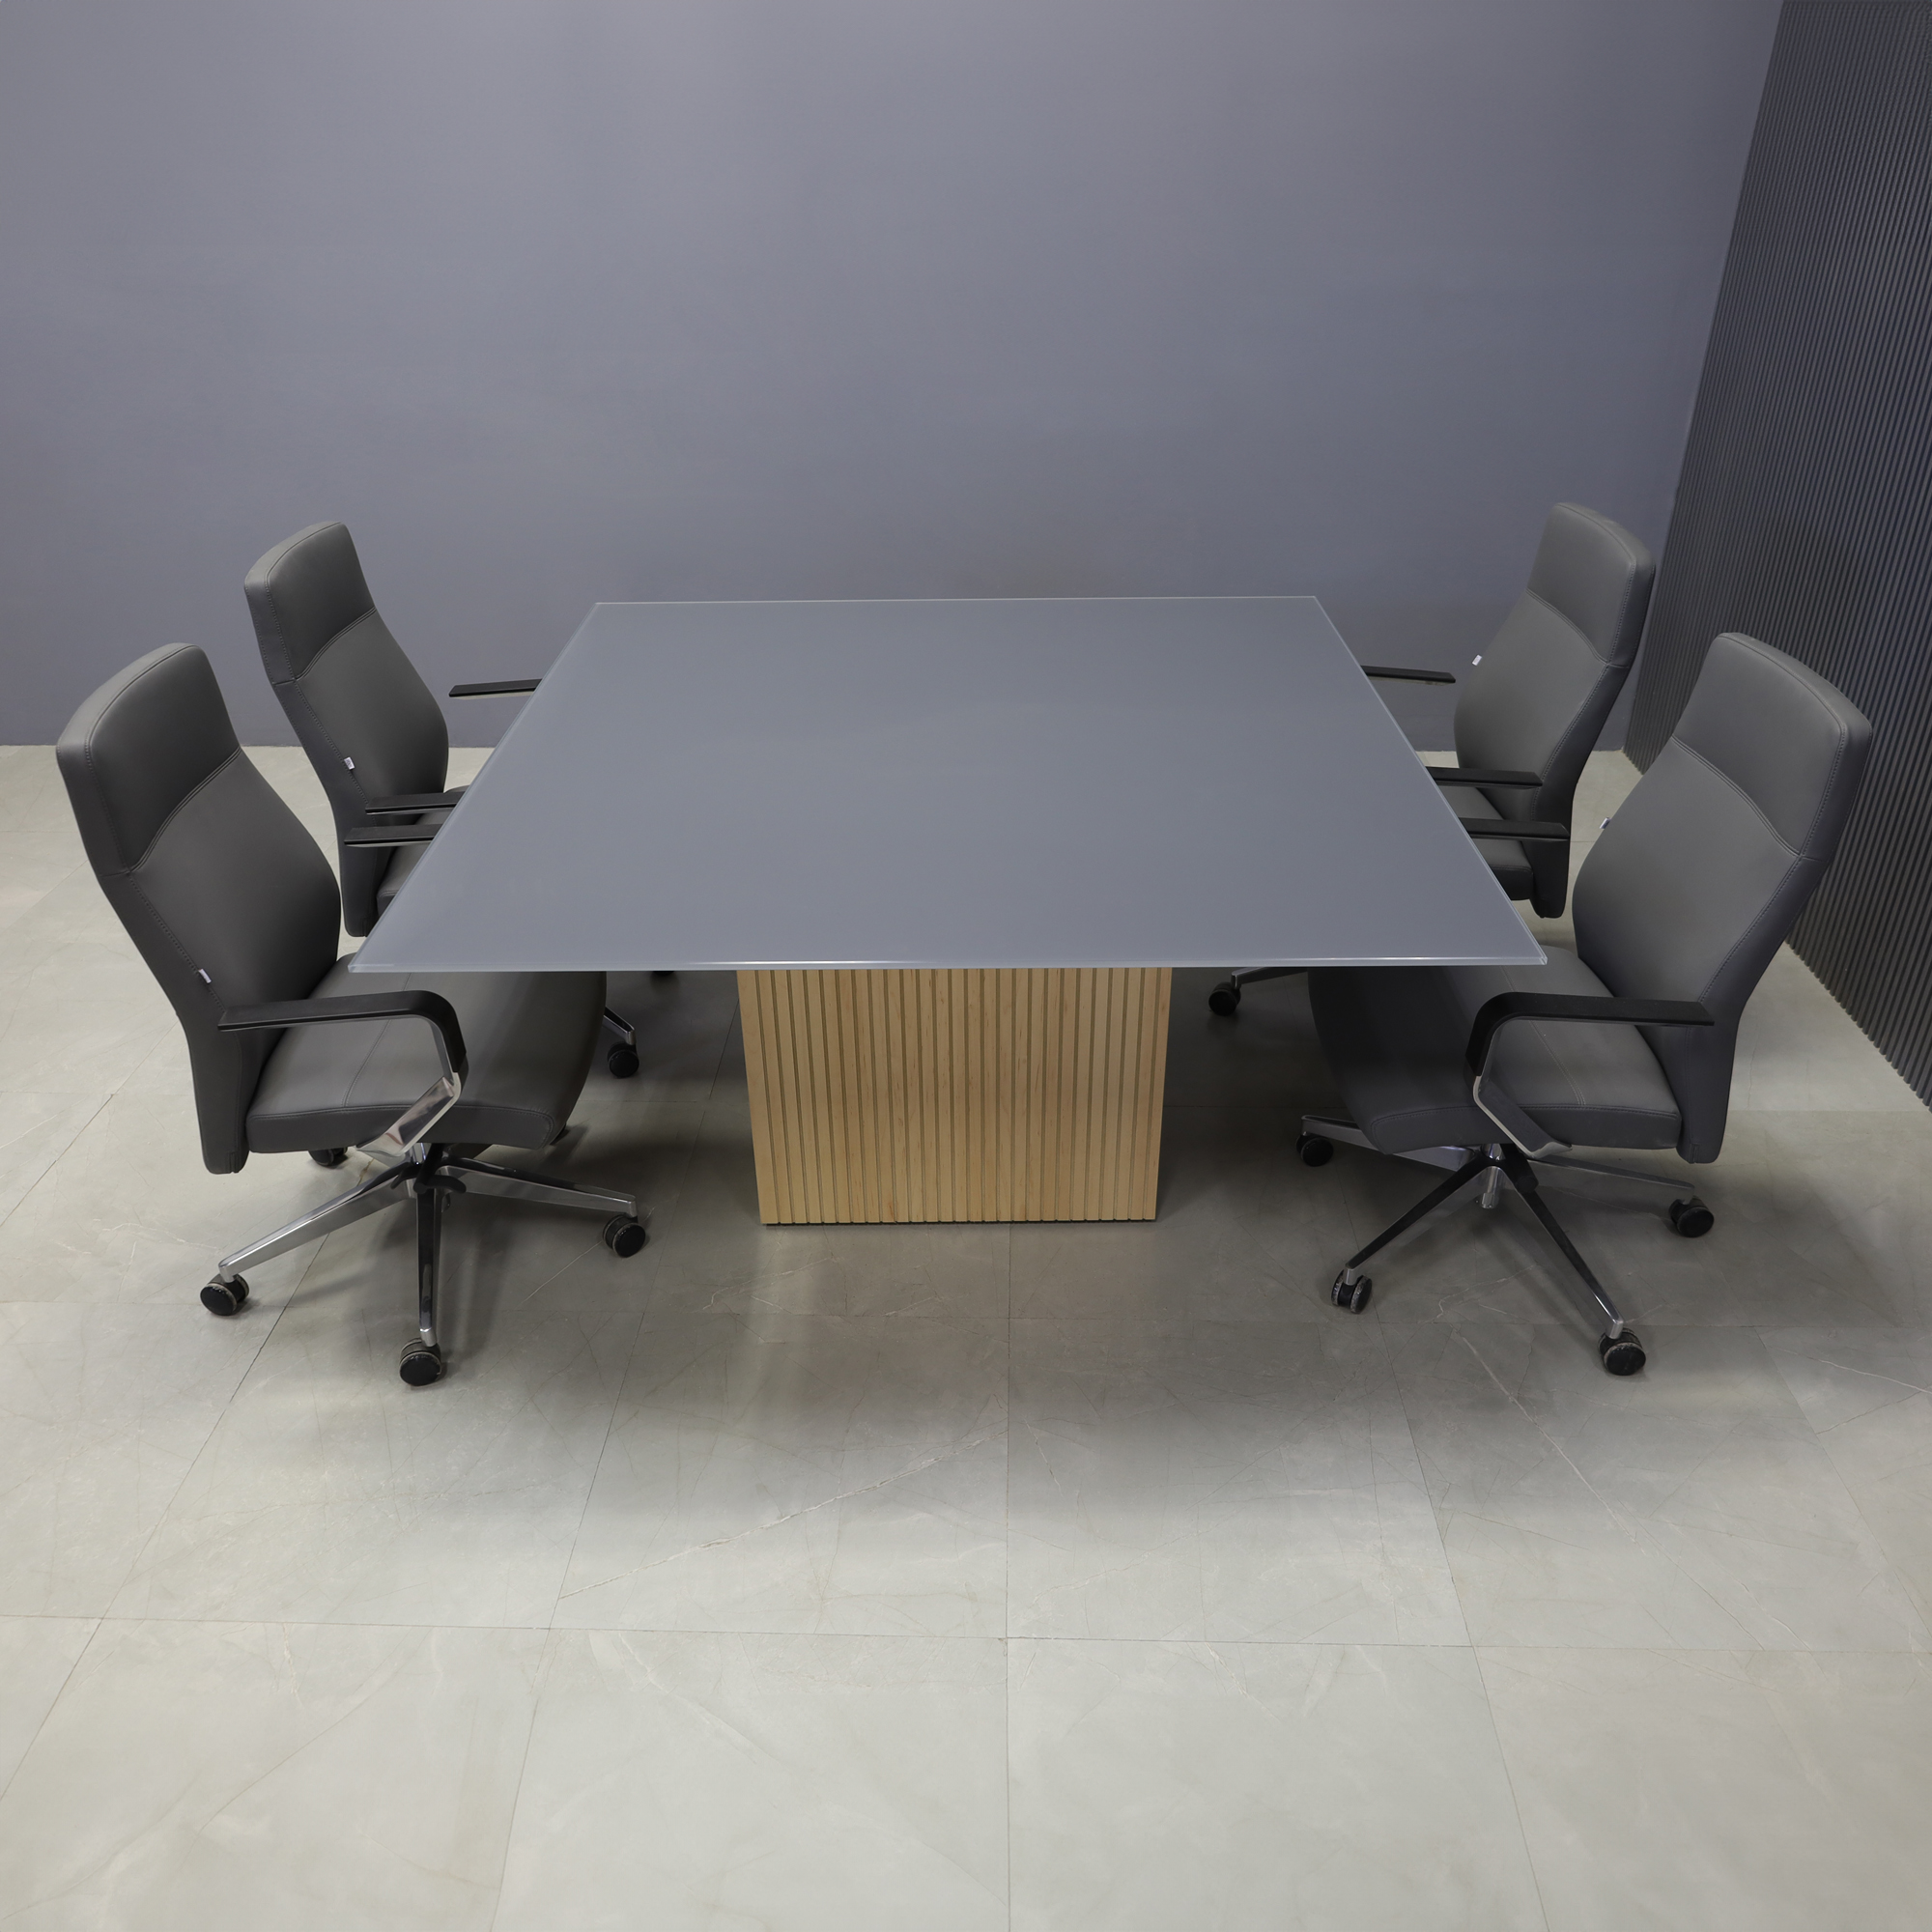 60-inch Omaha Square Conference Table in 1/2